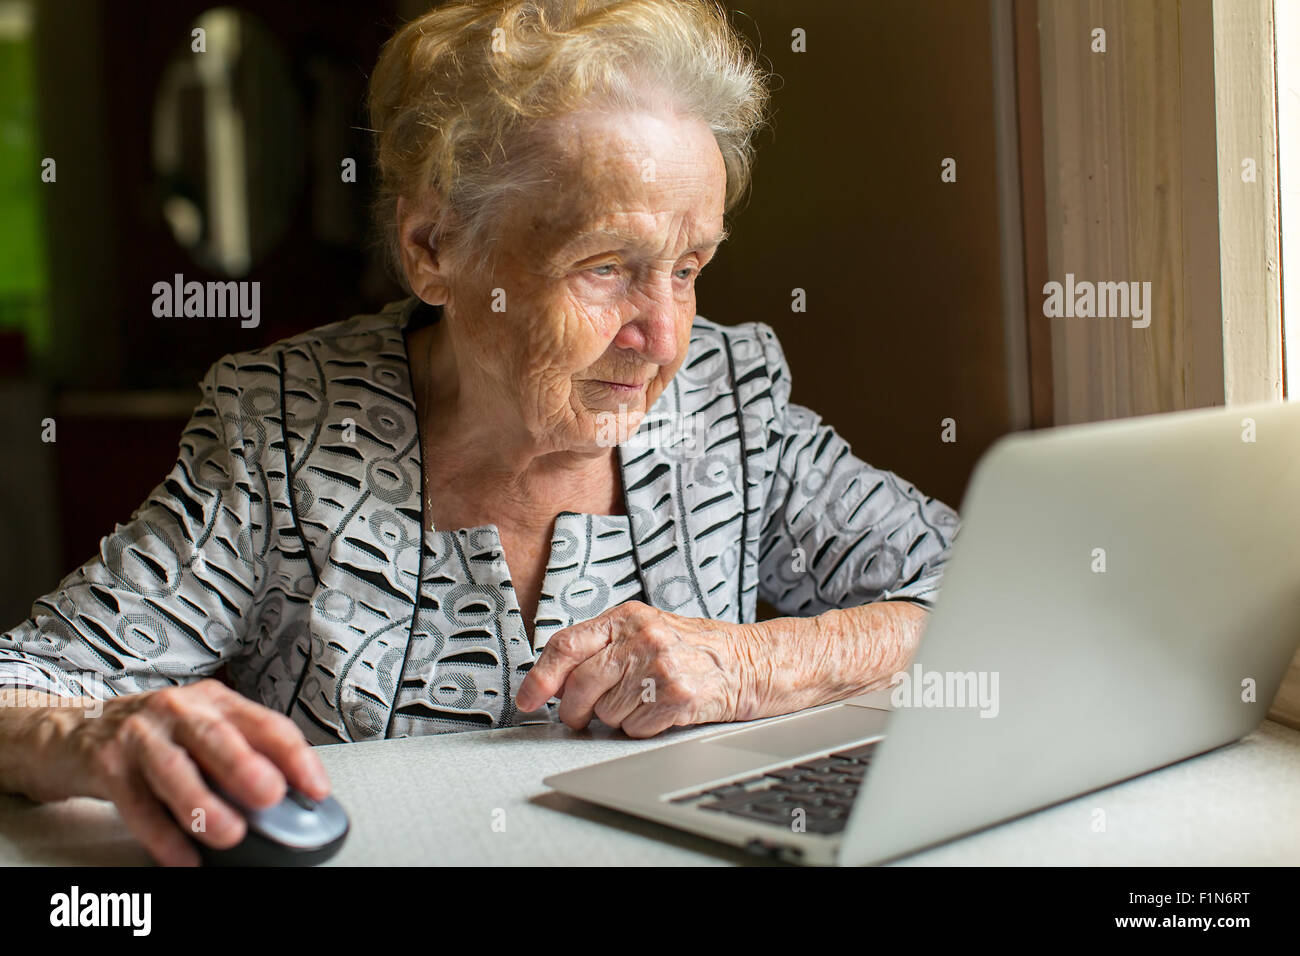 An elderly woman working on a laptop. Stock Photo